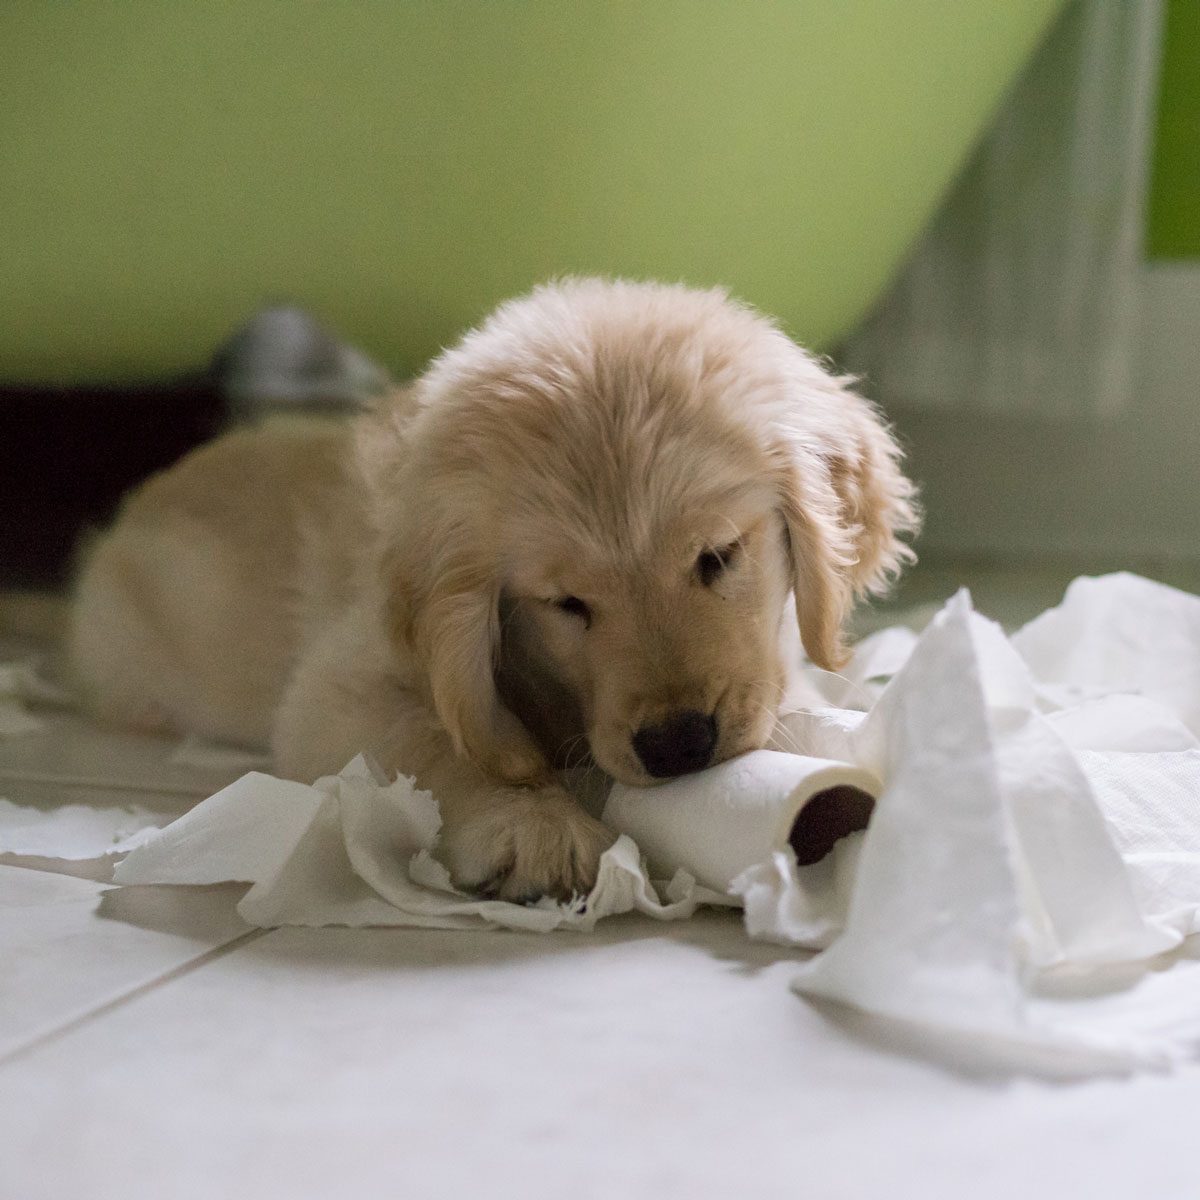 Puppy-proofing? Protect your dog — and your home